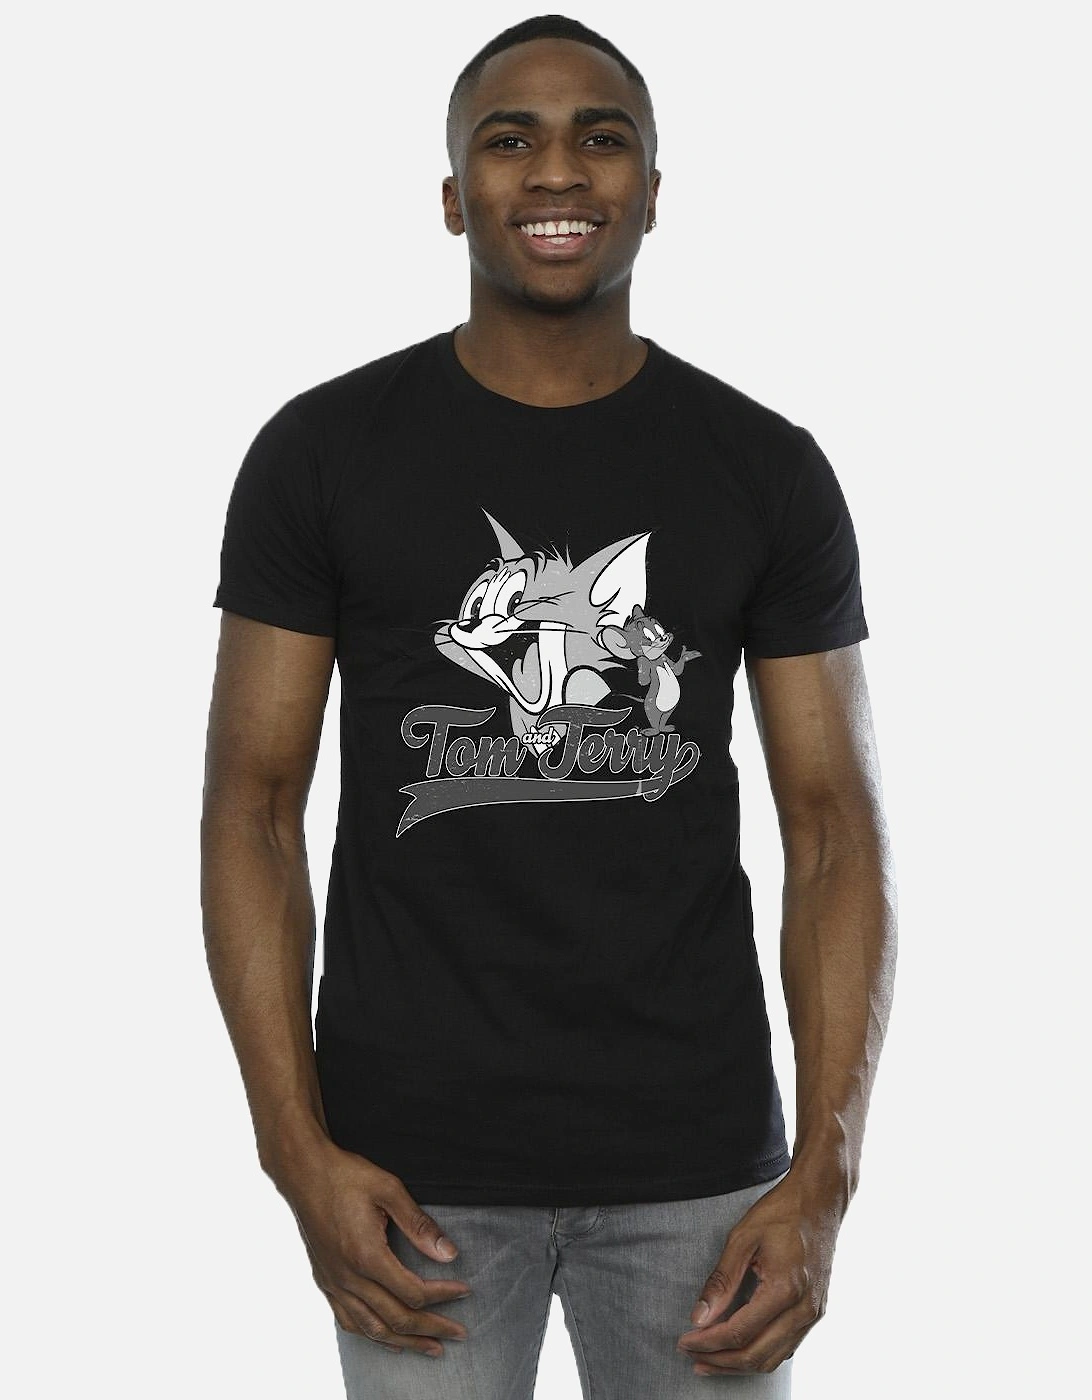 Tom And Jerry Mens Greyscale Square T-Shirt